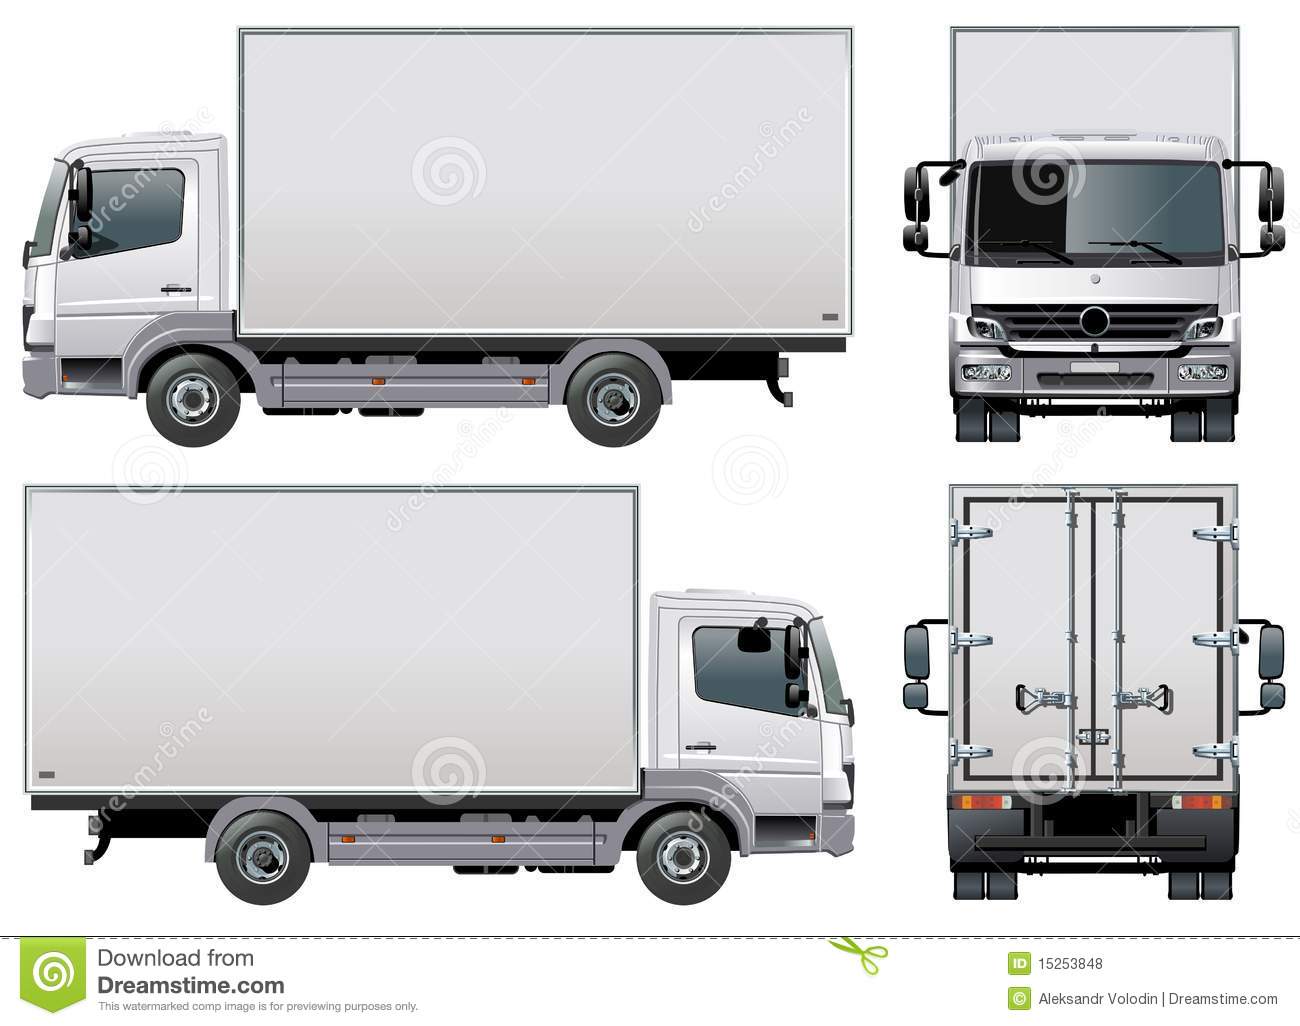 Delivery truck images free